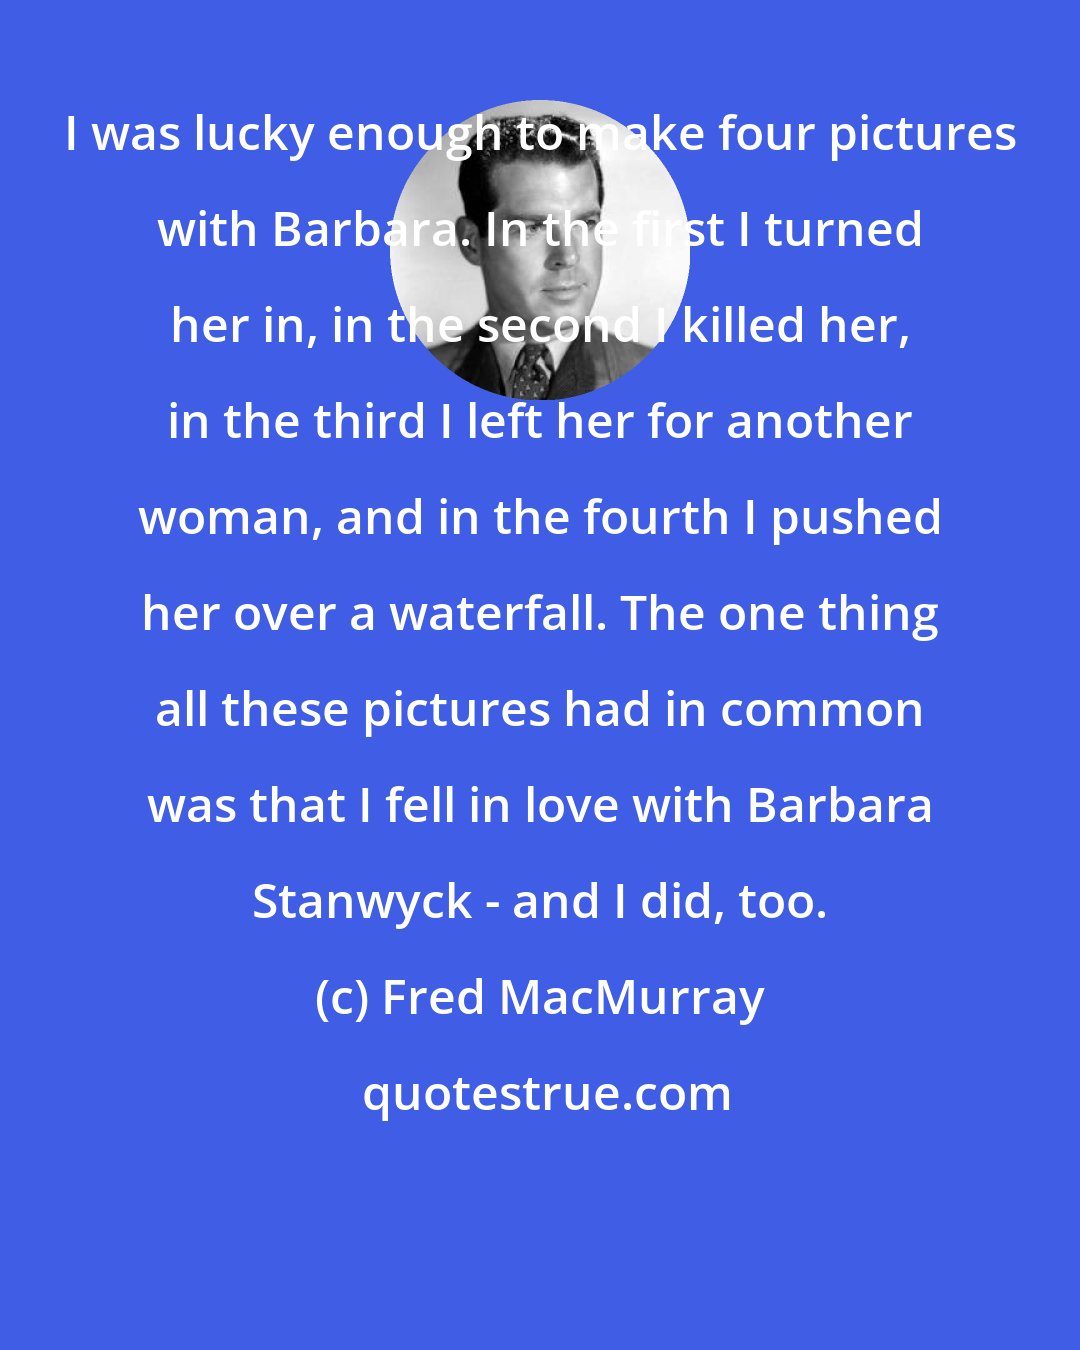 Fred MacMurray: I was lucky enough to make four pictures with Barbara. In the first I turned her in, in the second I killed her, in the third I left her for another woman, and in the fourth I pushed her over a waterfall. The one thing all these pictures had in common was that I fell in love with Barbara Stanwyck - and I did, too.